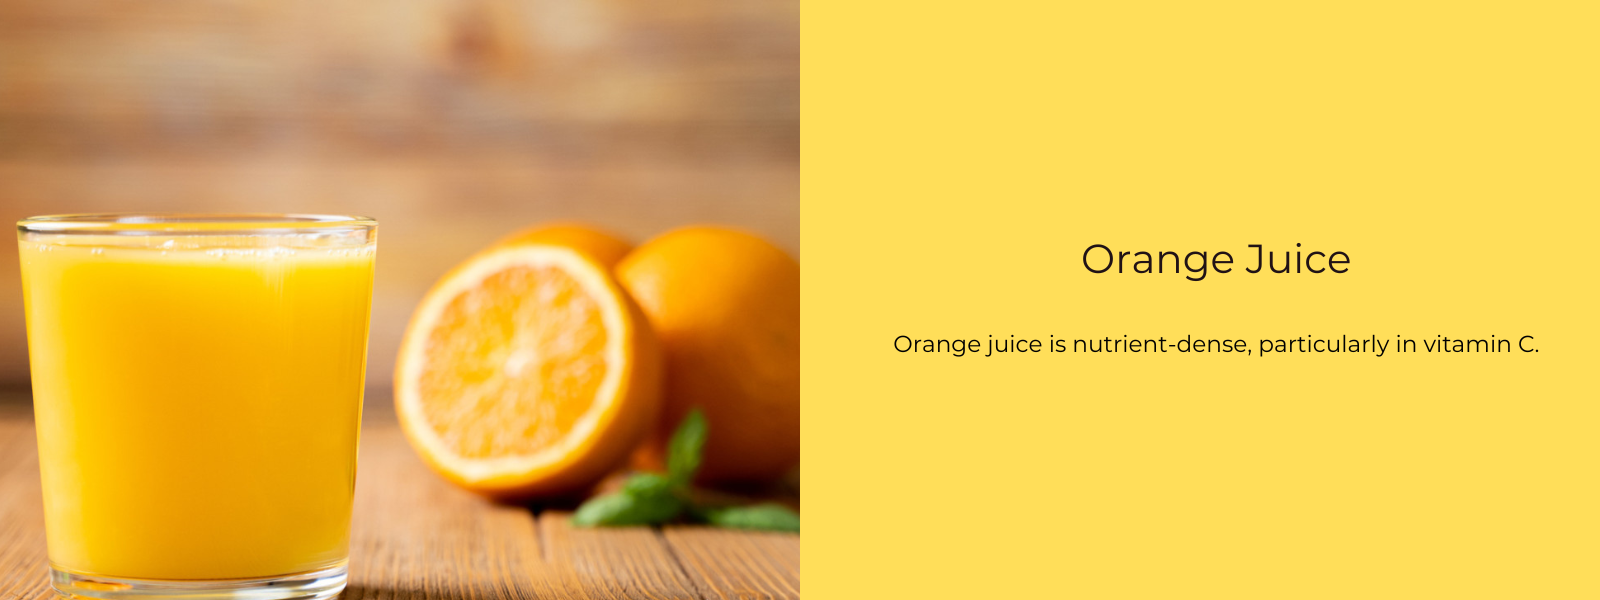 Orange Juice – Health Benefits, Uses and Important Facts